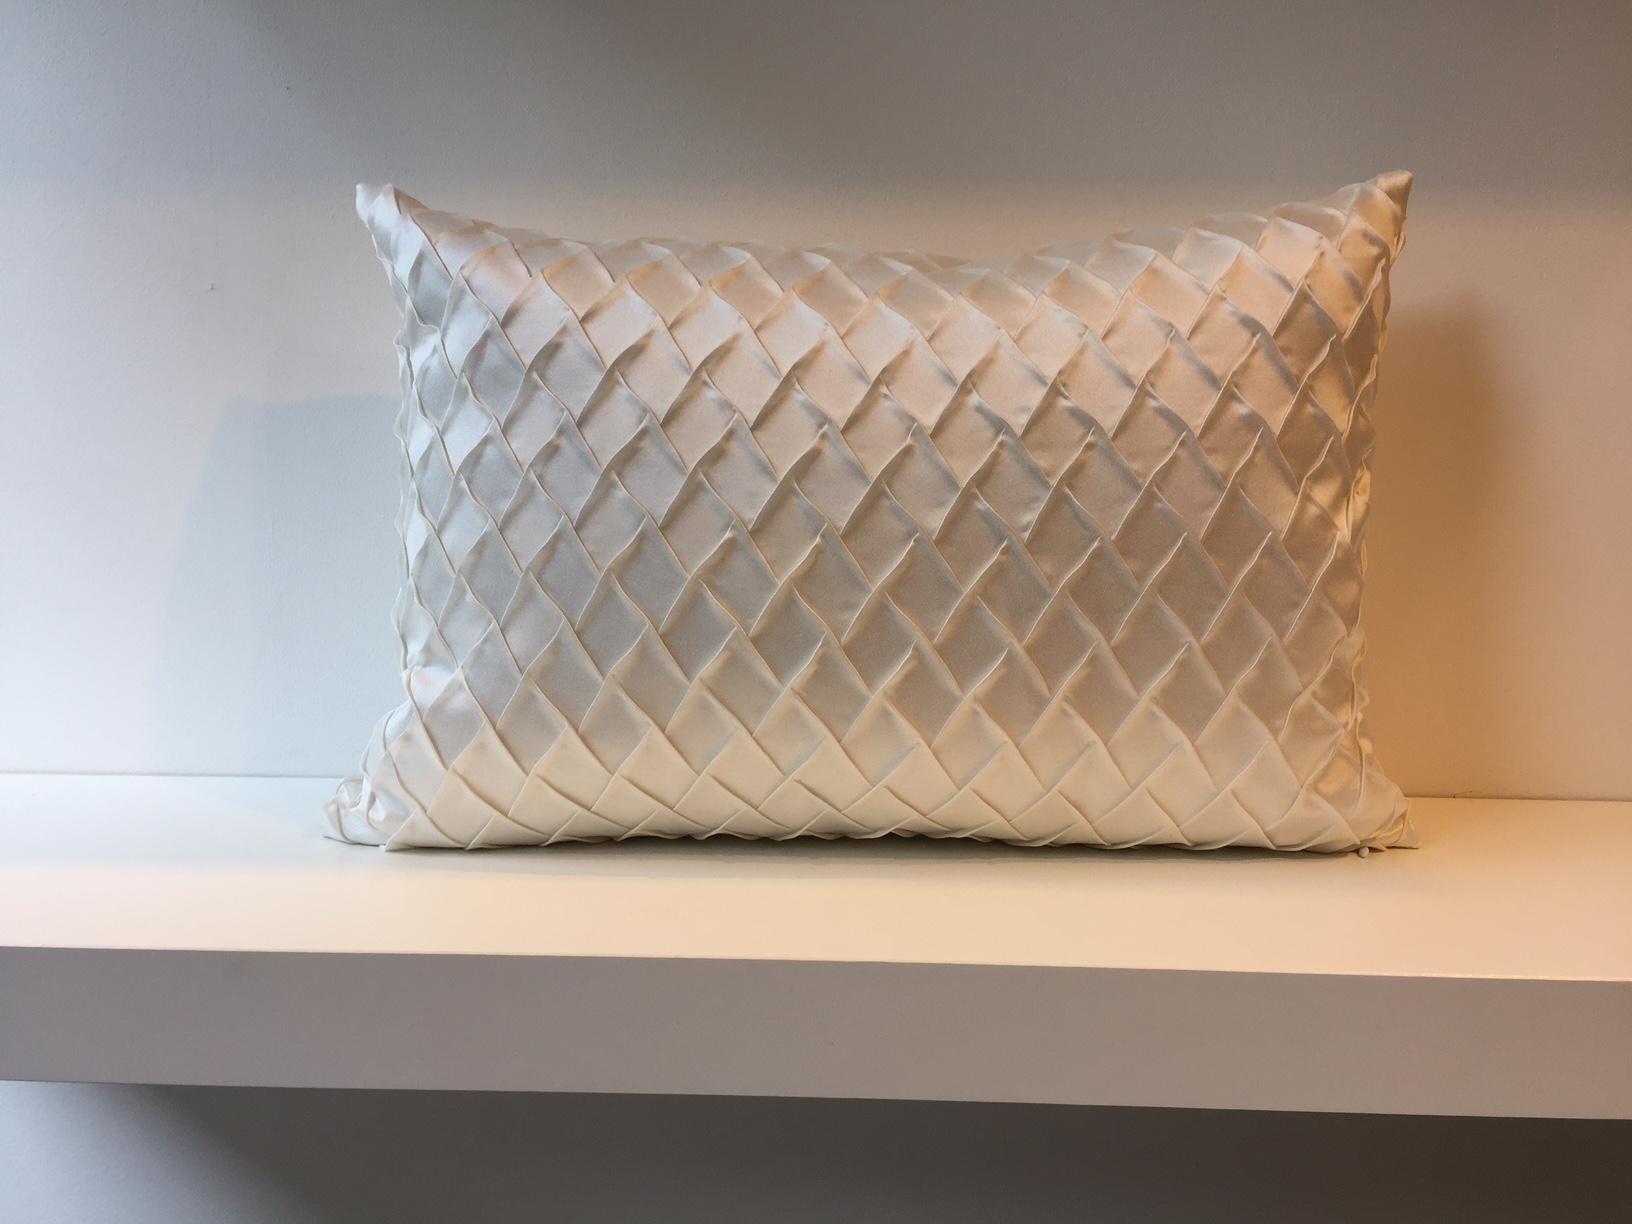 One pair silk cushions with embossed front panel in steam pleated silk, fish scale pattern, back panel plain silk, handwoven silk taffeta col. Oyster, size 35 x 50cm,
cushion cover with concealed zipper in the bottom seam,
inner pad with new